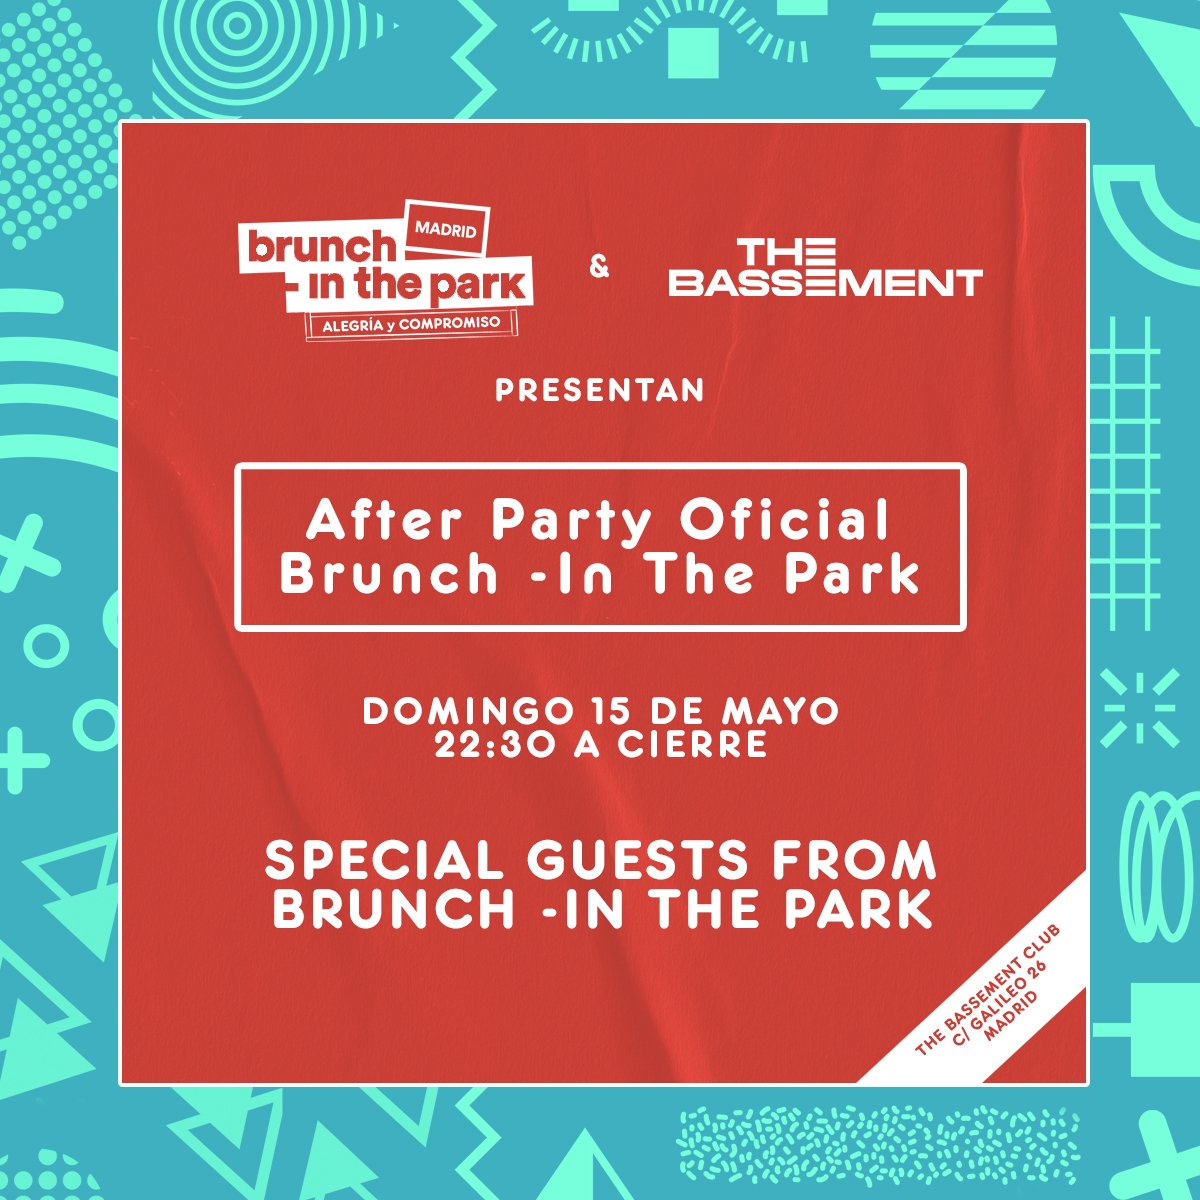 AFTER-BRUNCH-IN-THEPARK-THE-BASSEMENT